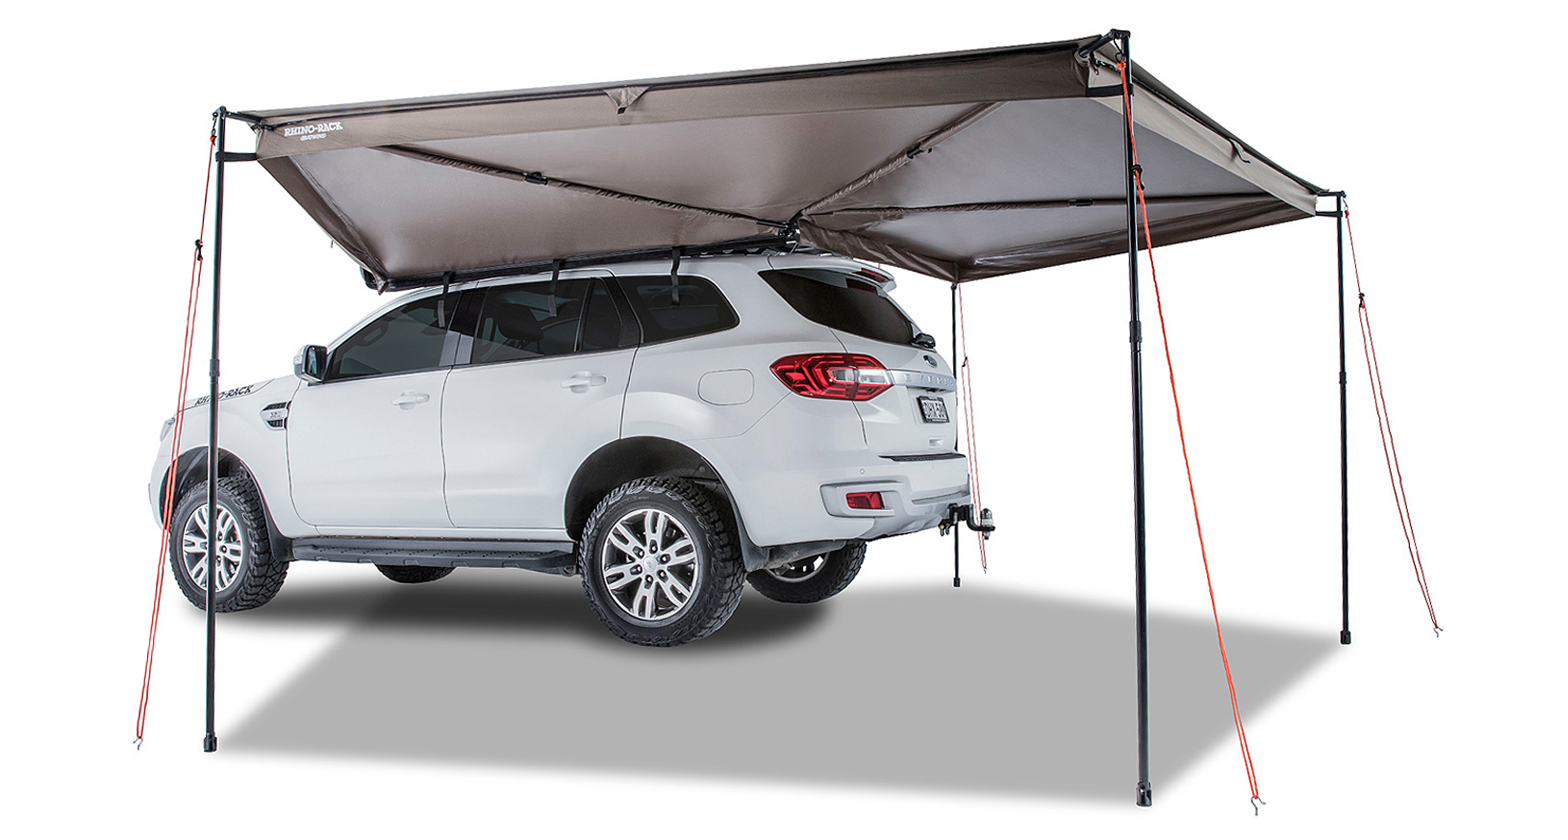 Rhino-Rack Releases Batwing Awning – 270 Degrees of Shade